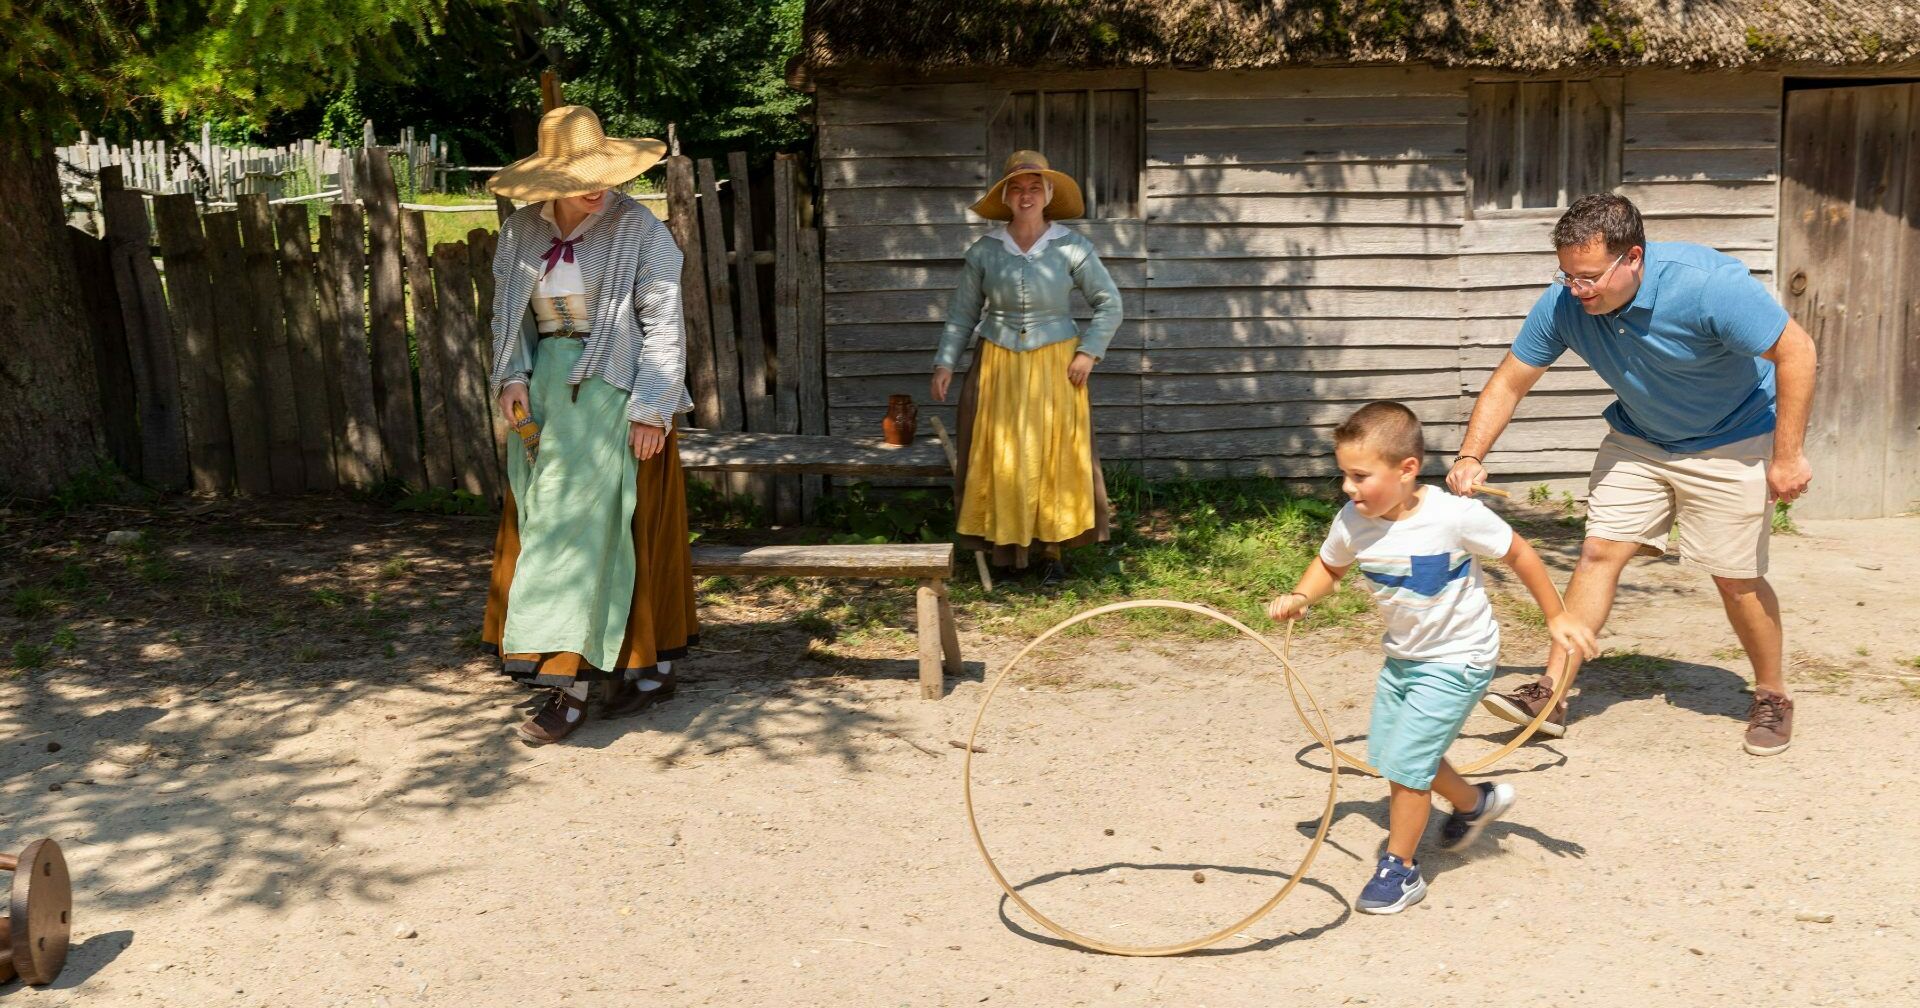 Father and son spin hoops with Pilgrims in English Village